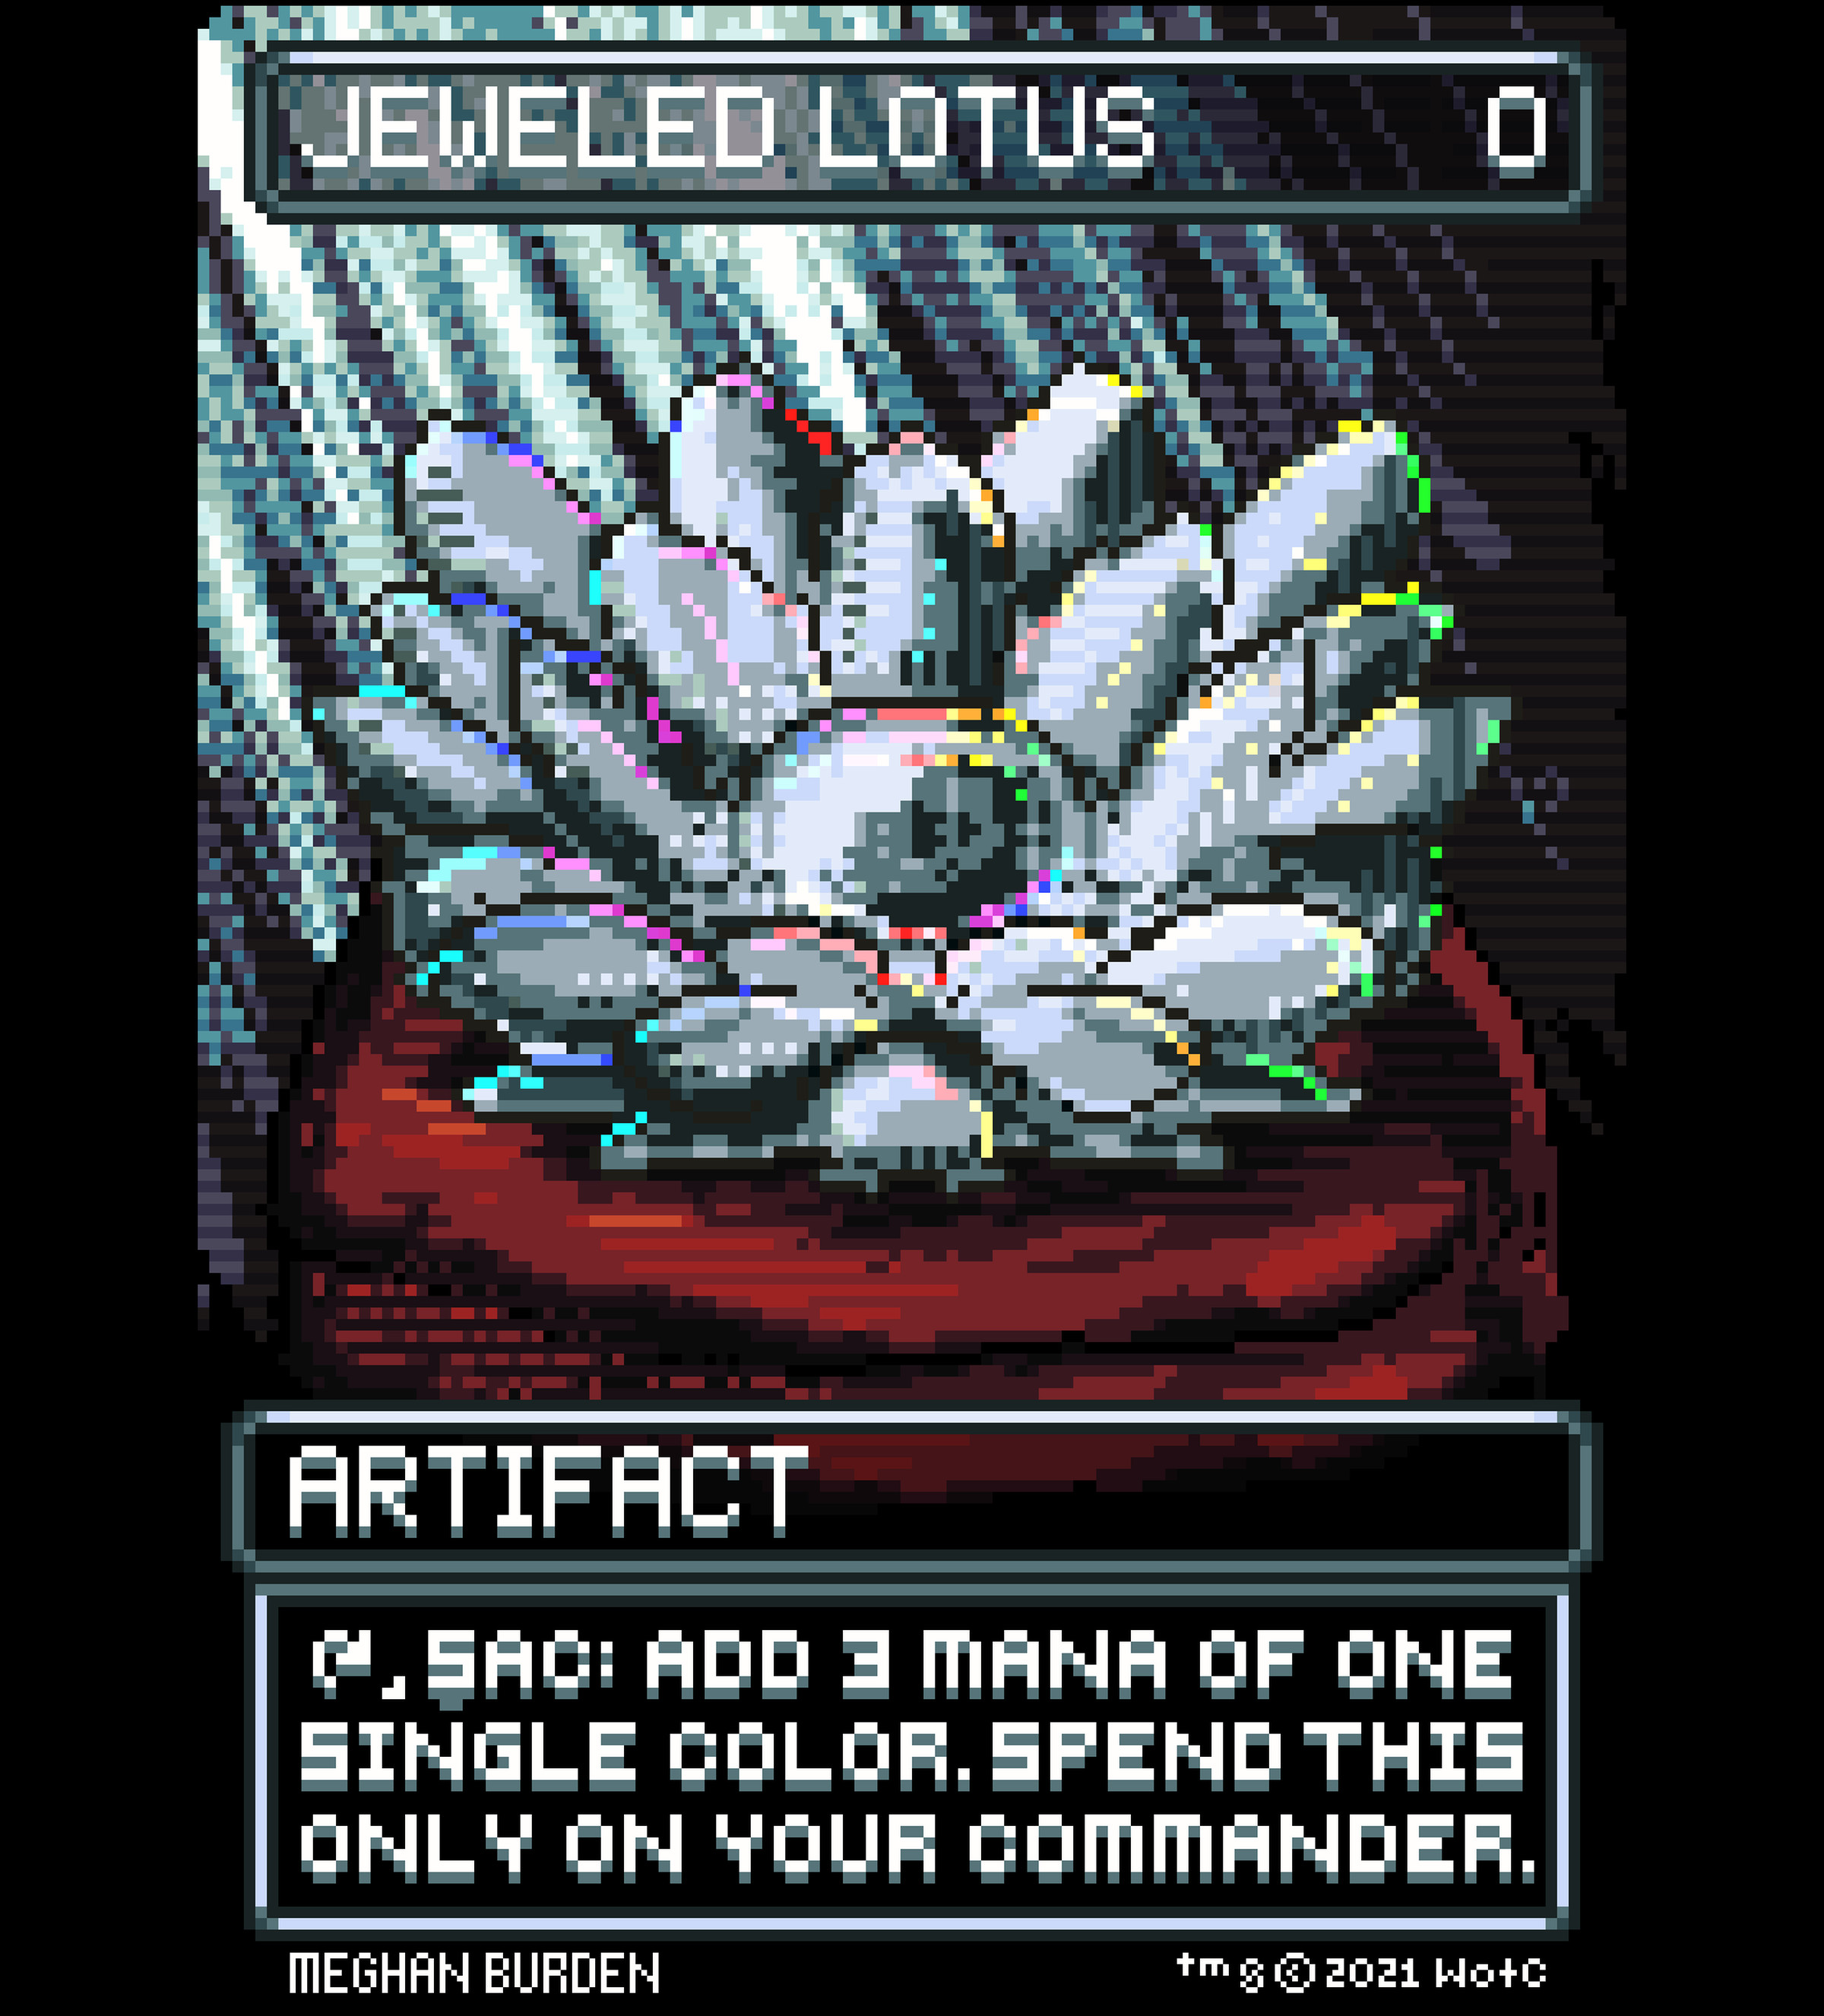 Meghan Burden’s pixel proxy card for Magic The Gathering card Jeweled Lotus